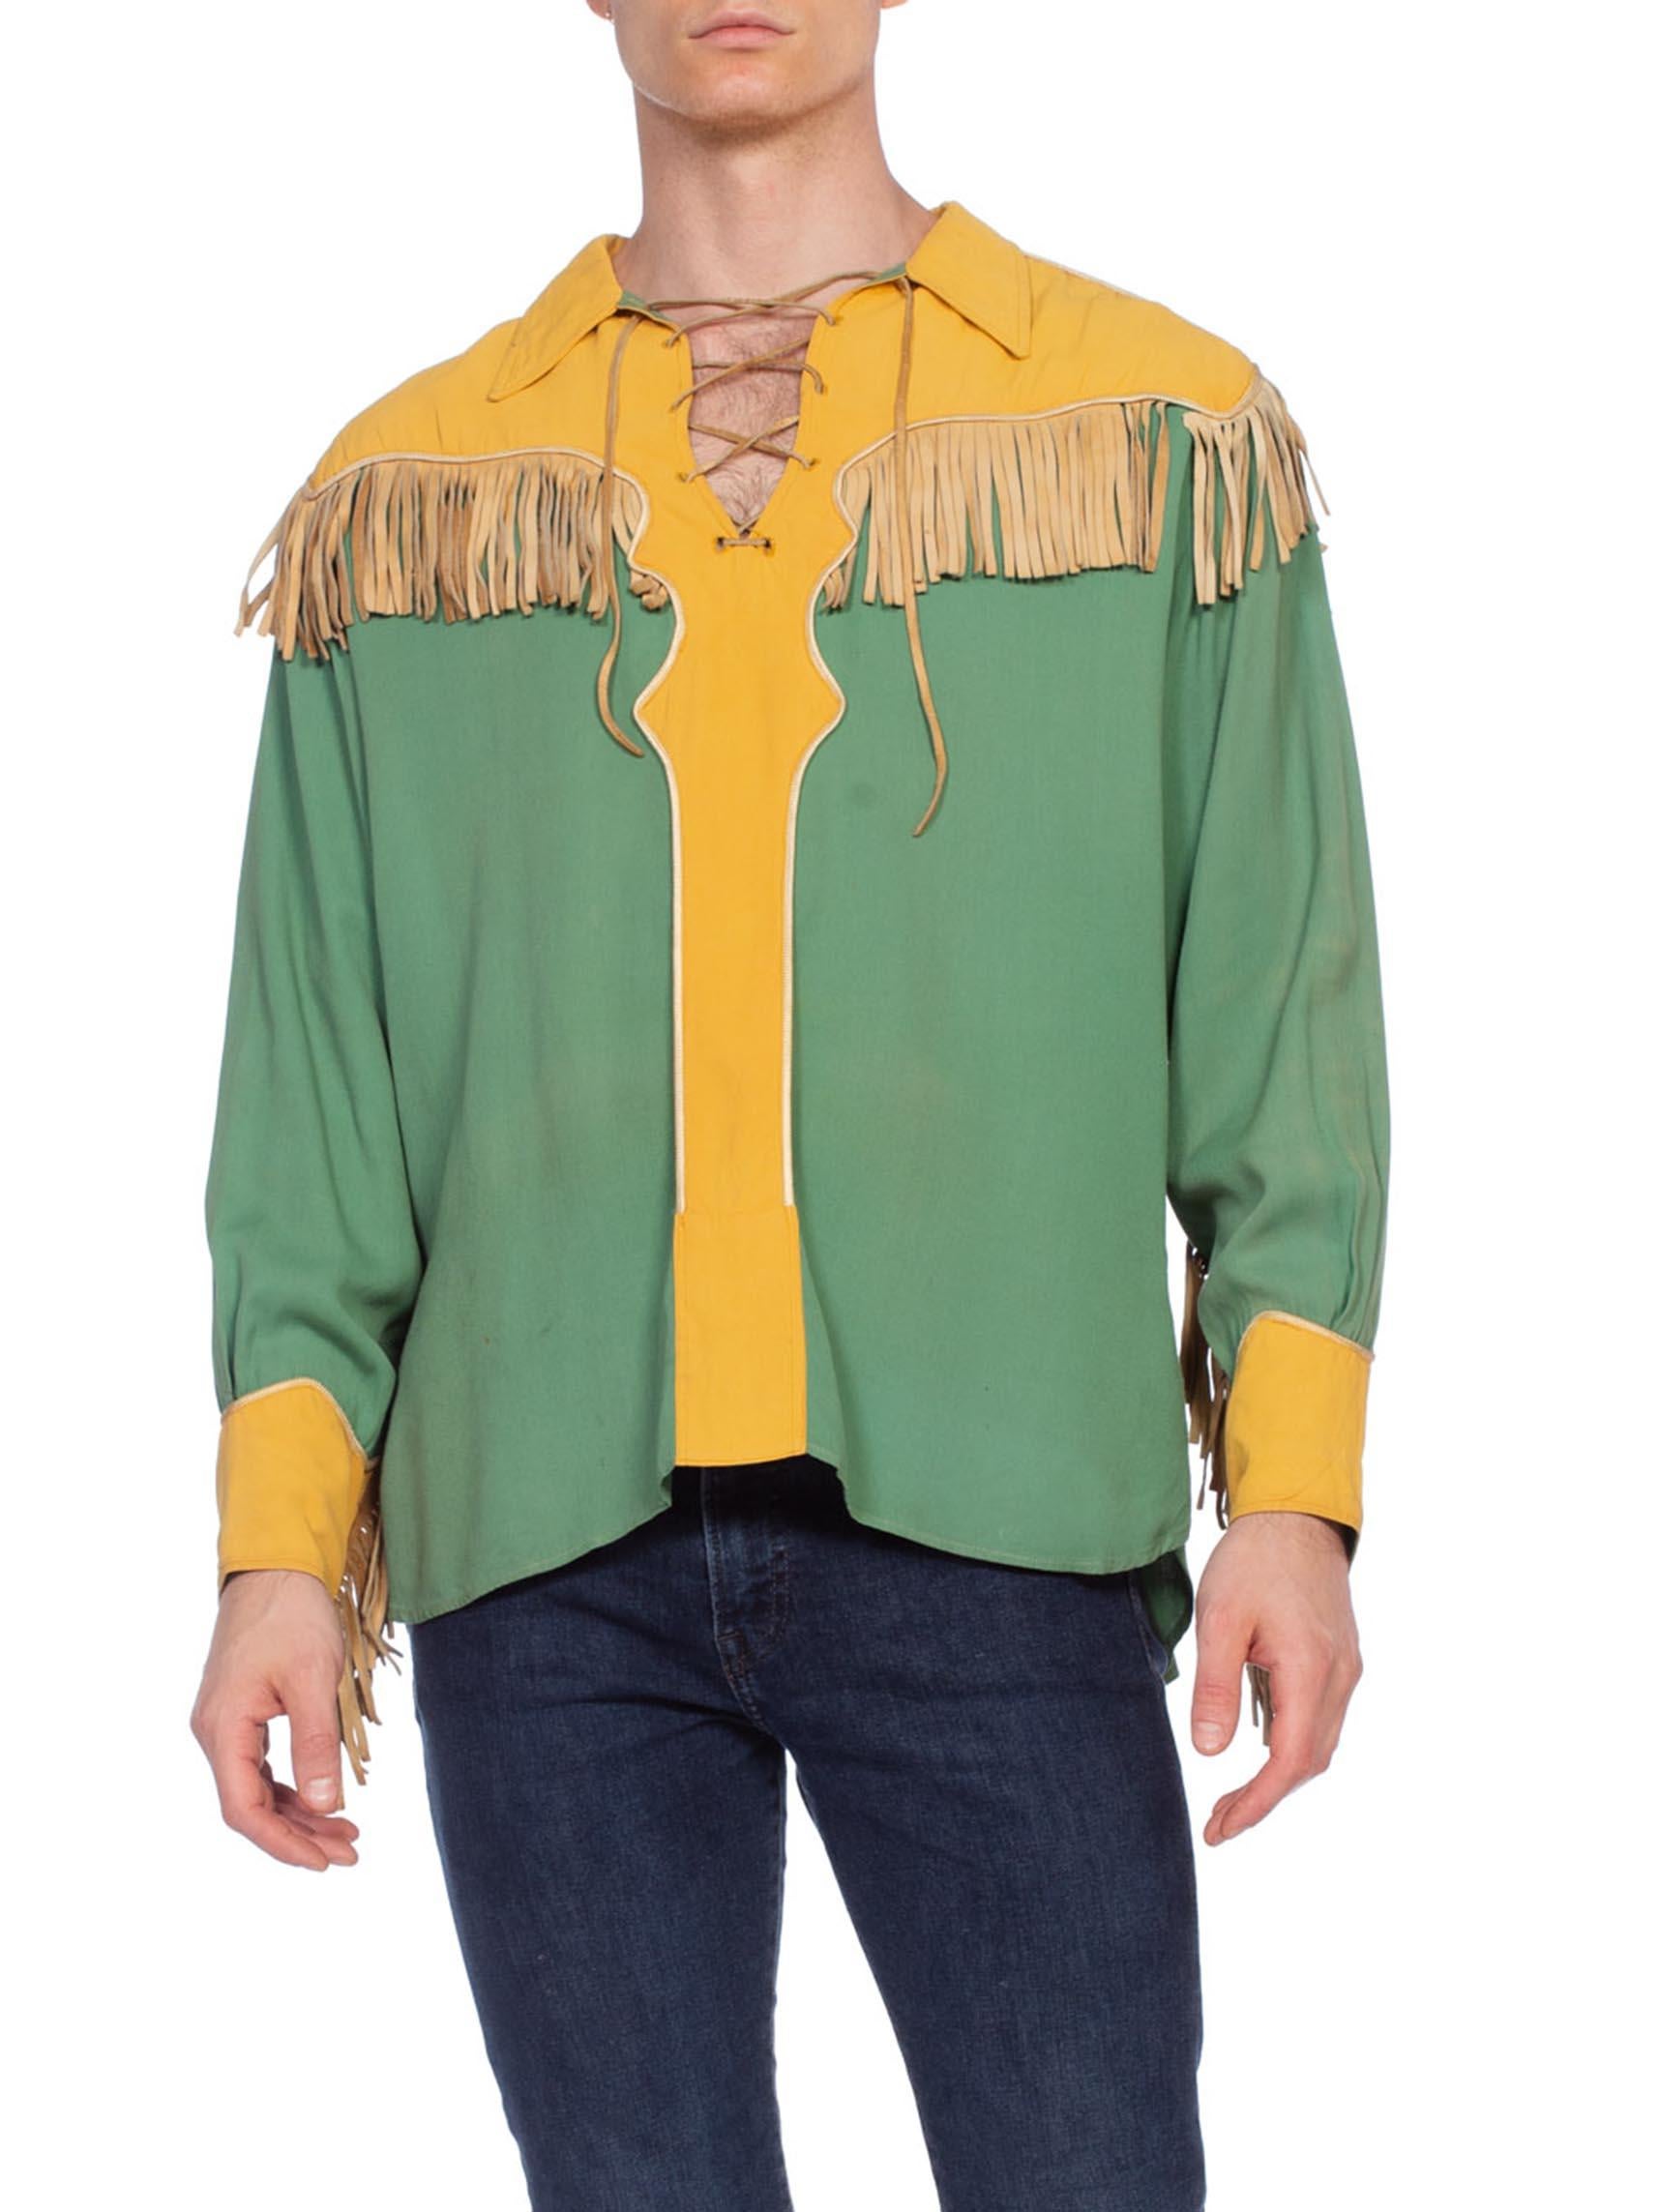 Phenomenal condition for the age, some areas of soiling however no gross stains nor perspiration wear. The leather is in pretty good shape and is not brittle nor stiff. VERY rare custom made western shirt.  1940'S Green & Gold Rayon Rare Men's Gene